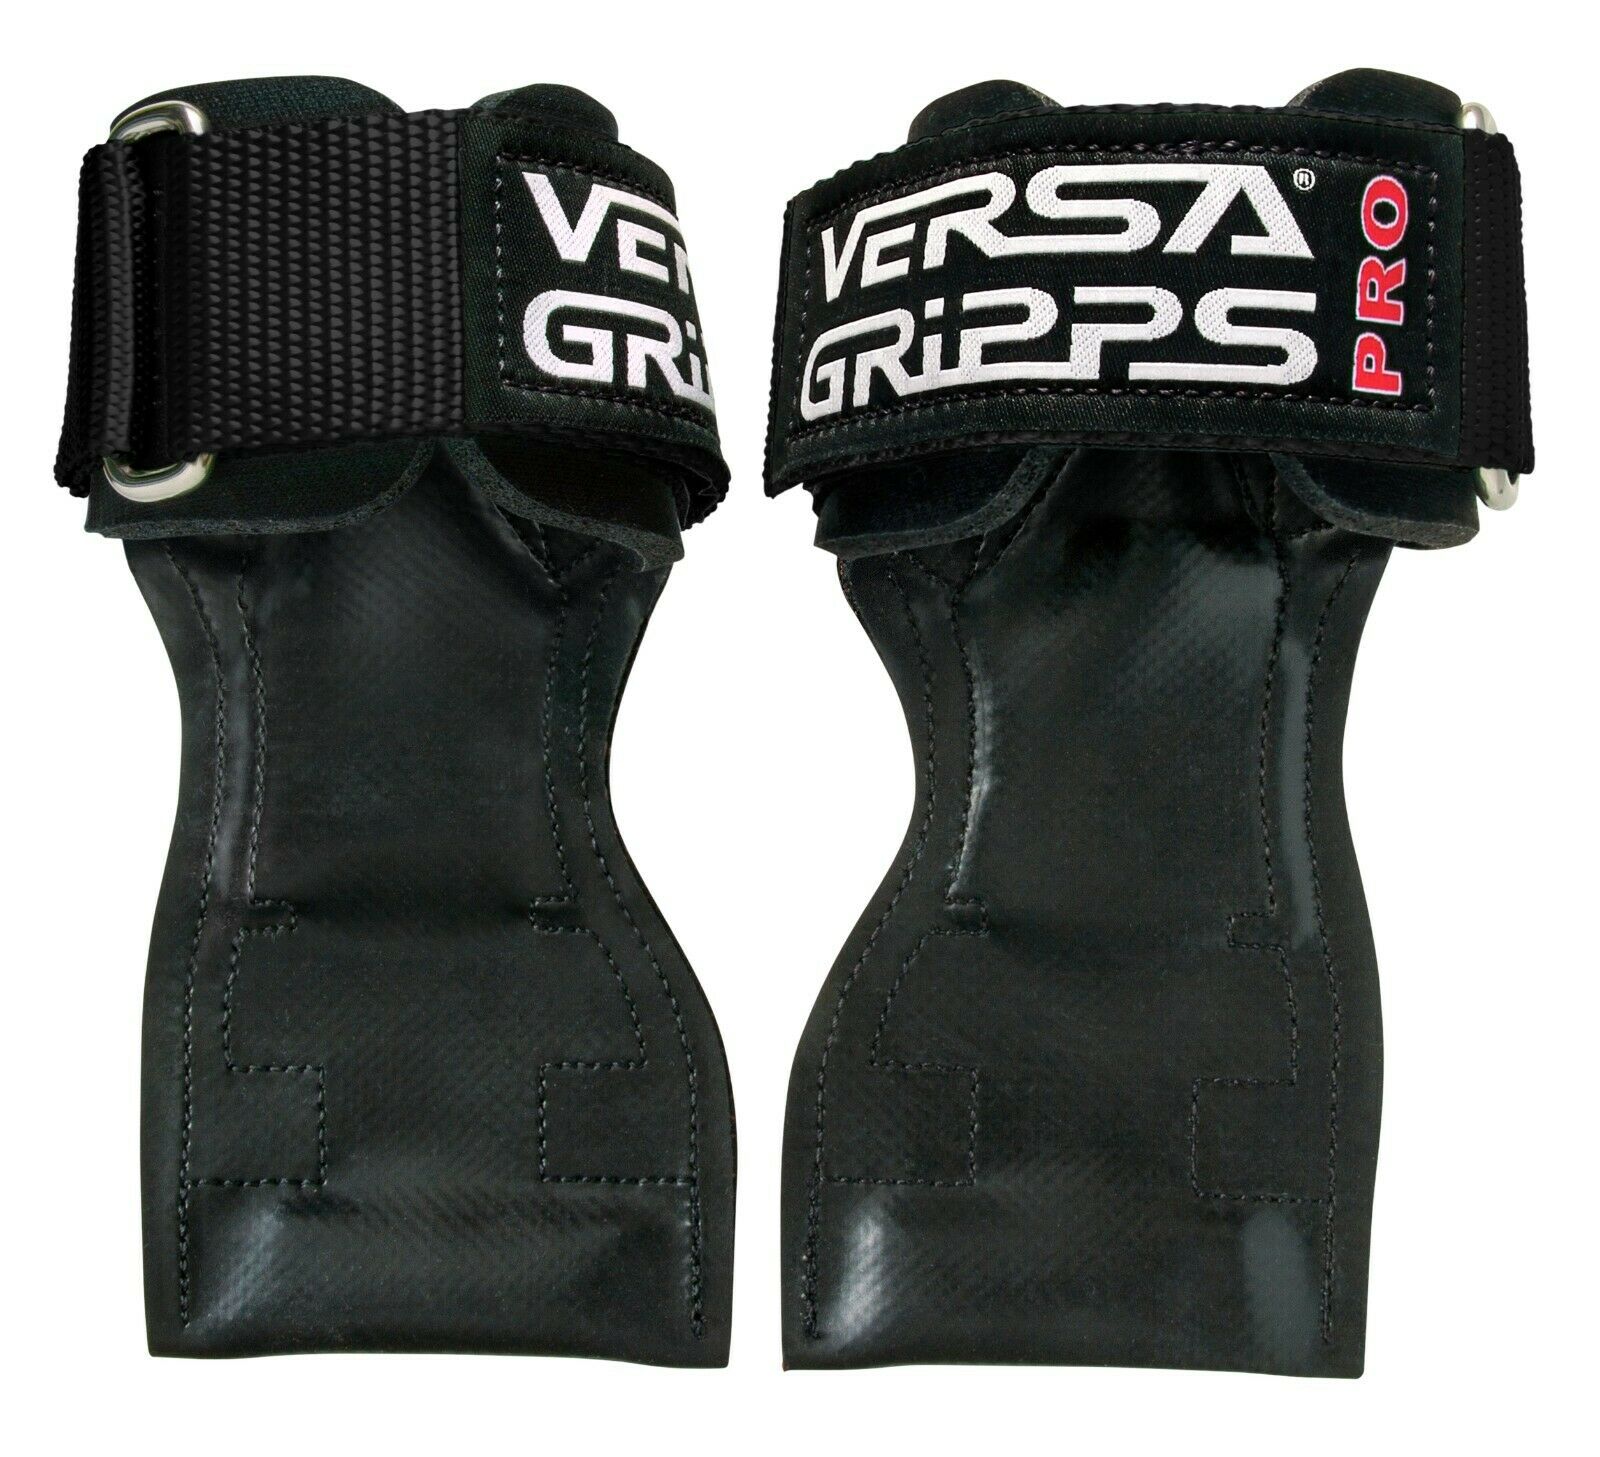 Versa Gripps® Pro Authentic Made In The Usa Grips Weightlifting Straps Gloves